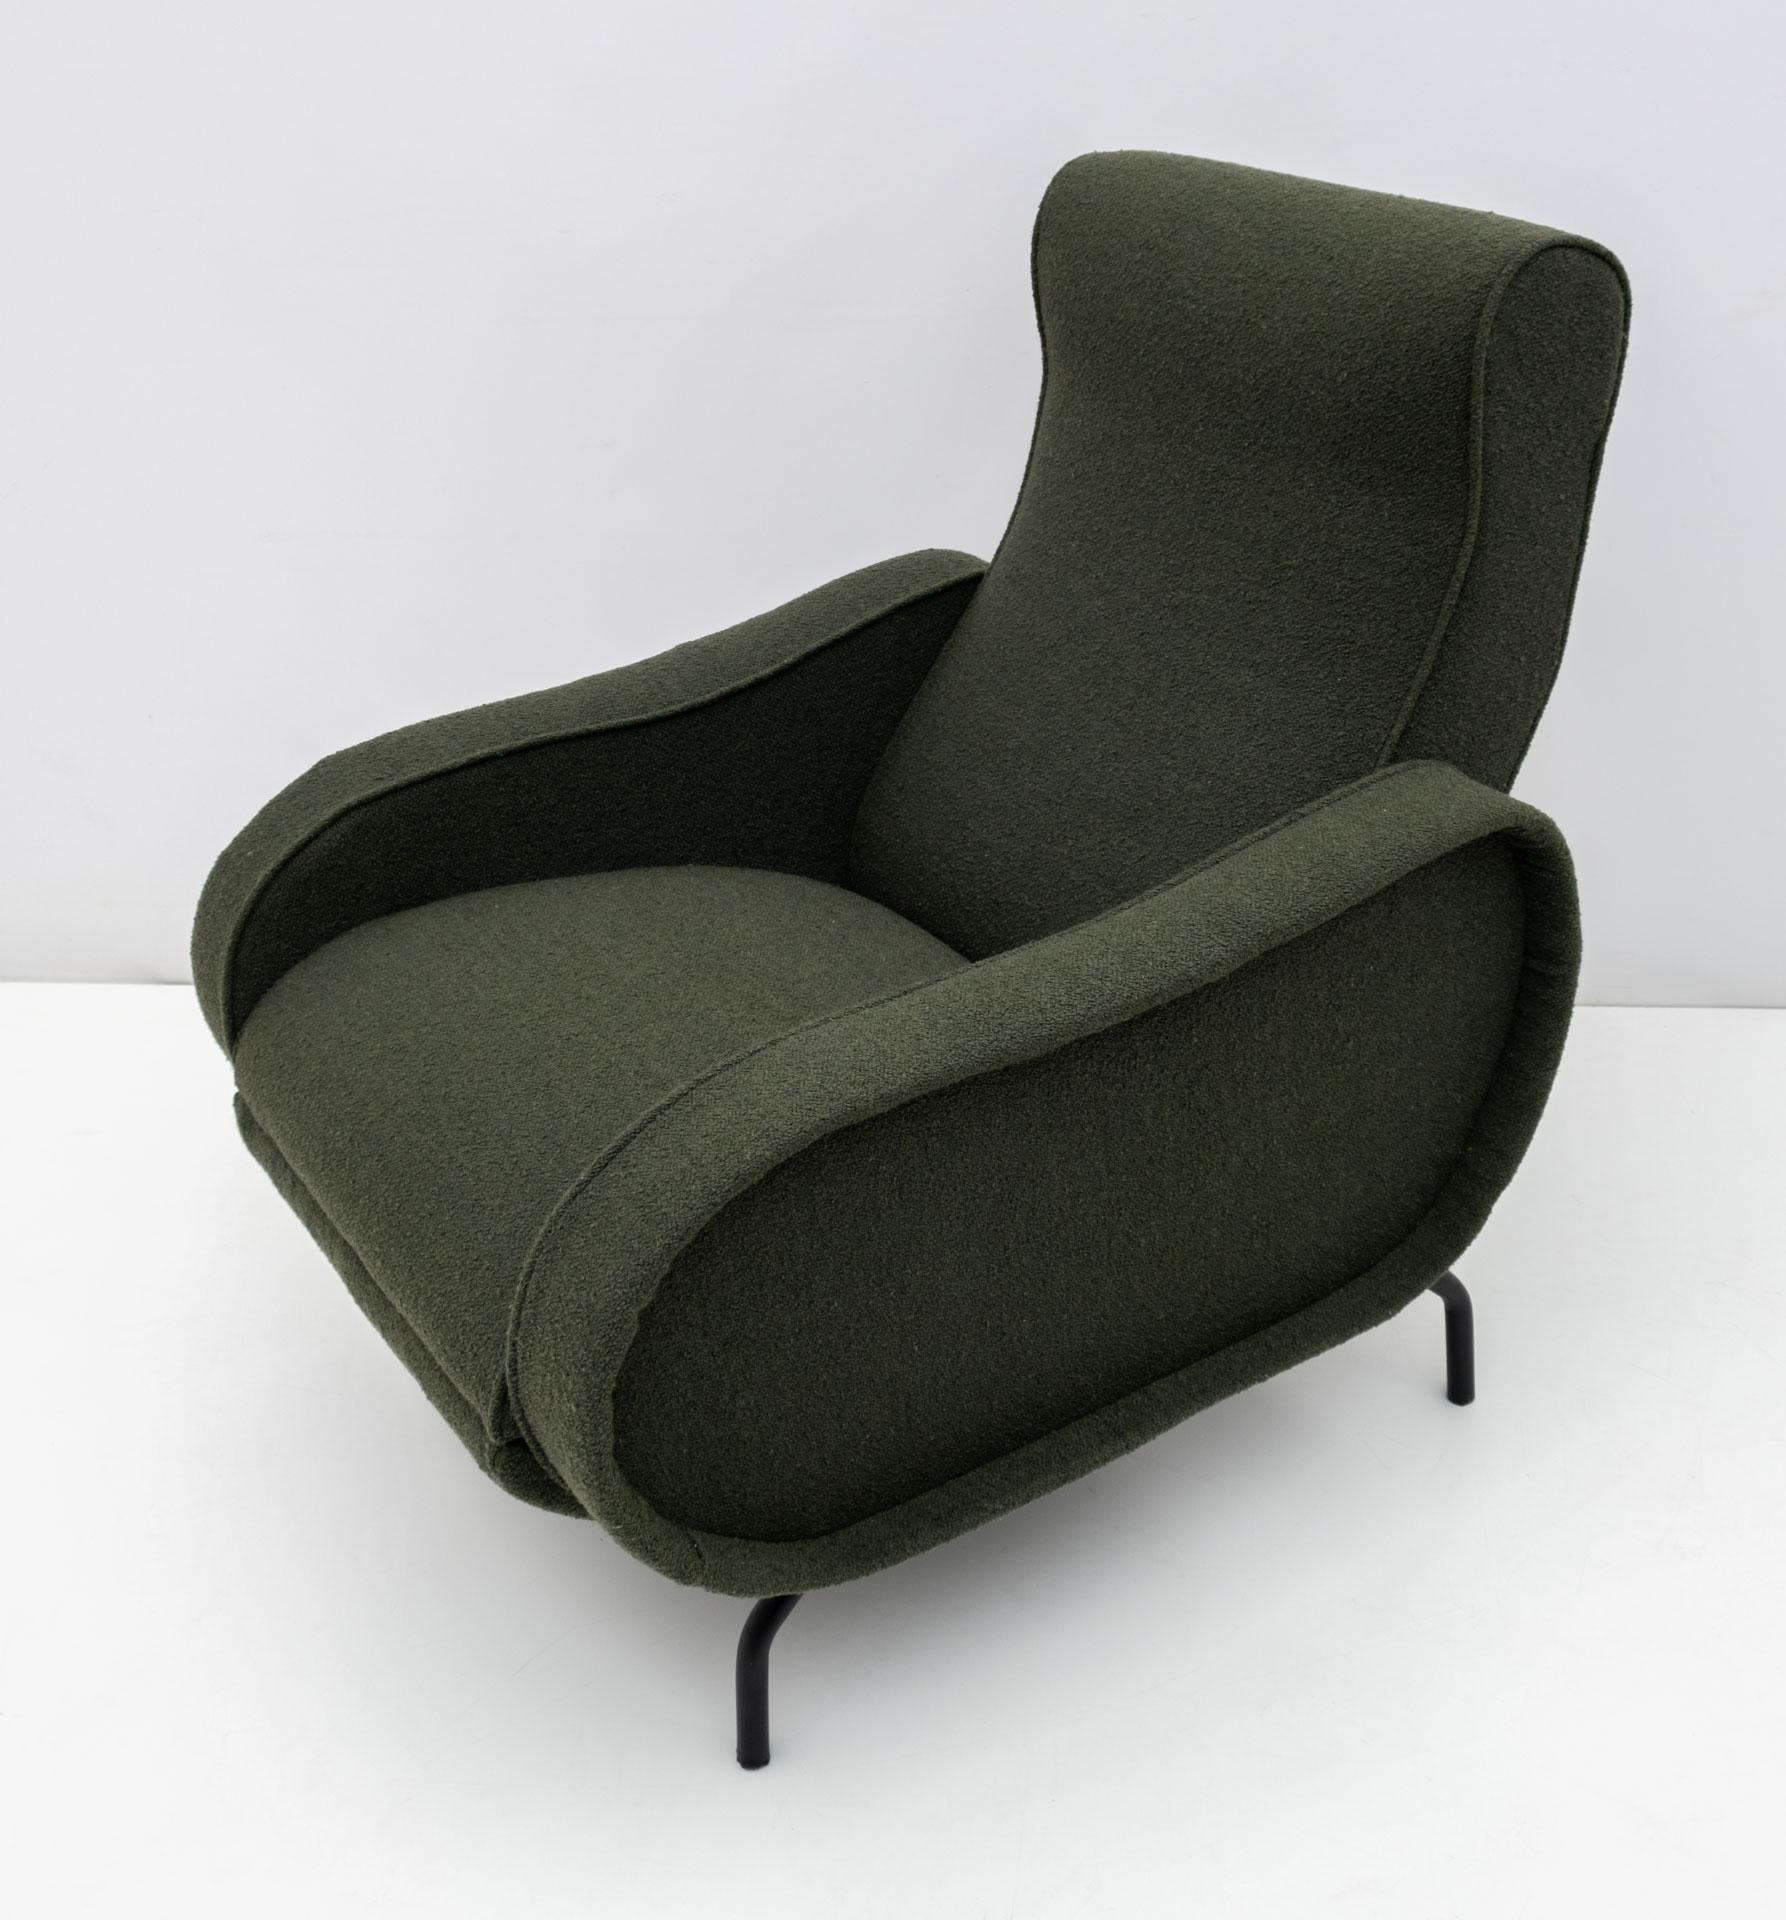 Reclining armchair designed by Marco Zanuso in the 1950s, the armchair has been restored and upholstered in English green Bouclè fabric

The elongated armchair measures 153 cm.